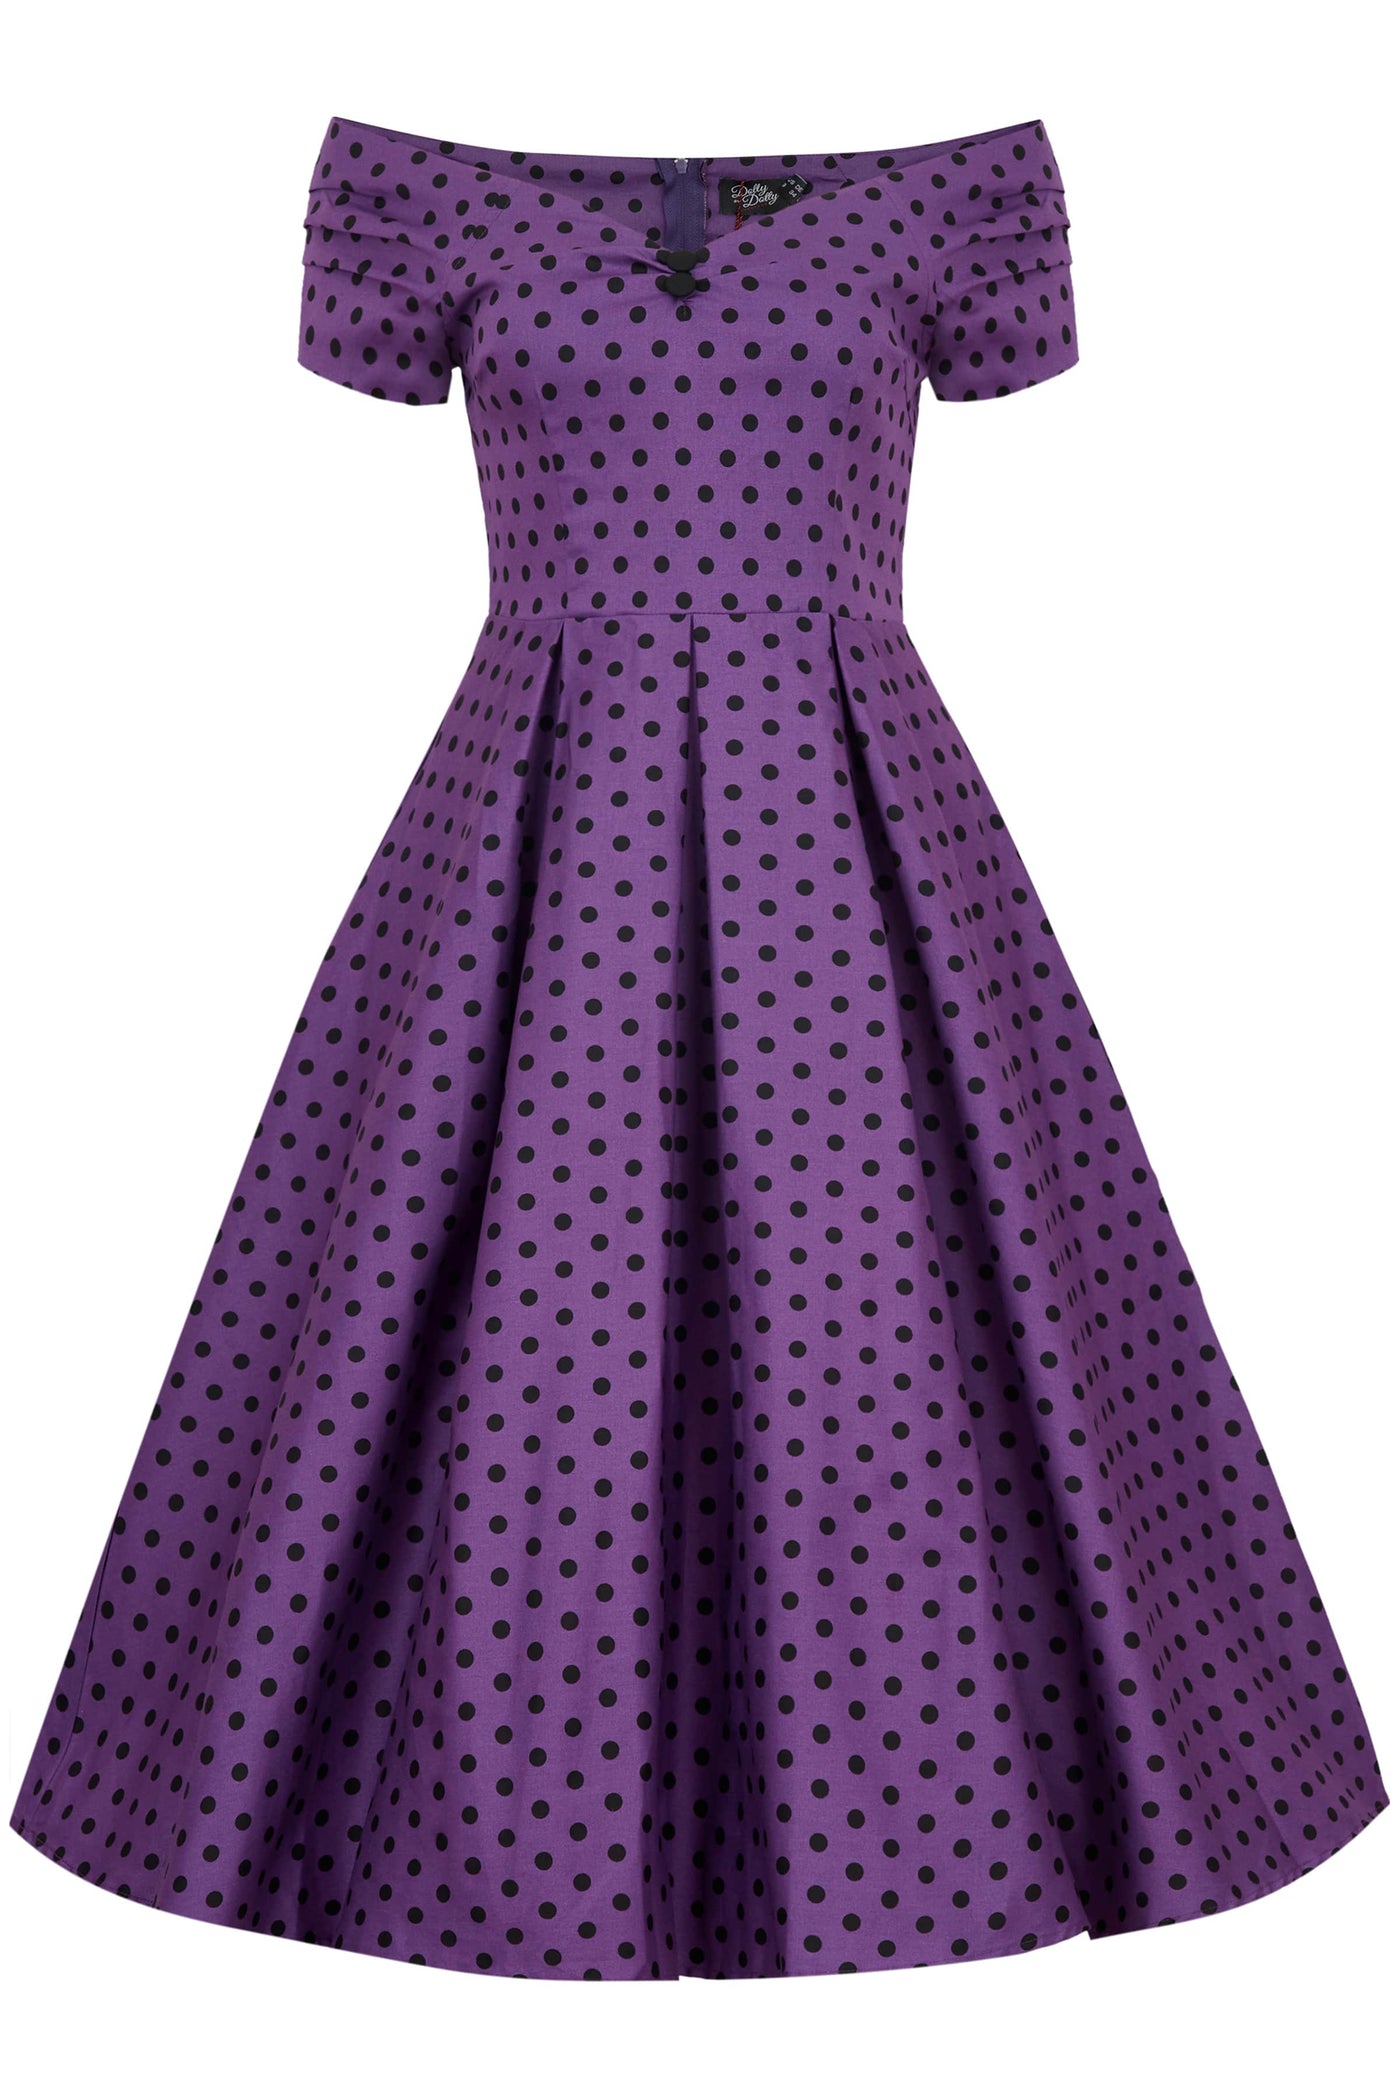 Rockabilly Purple Swing Dress with Sleeves front view